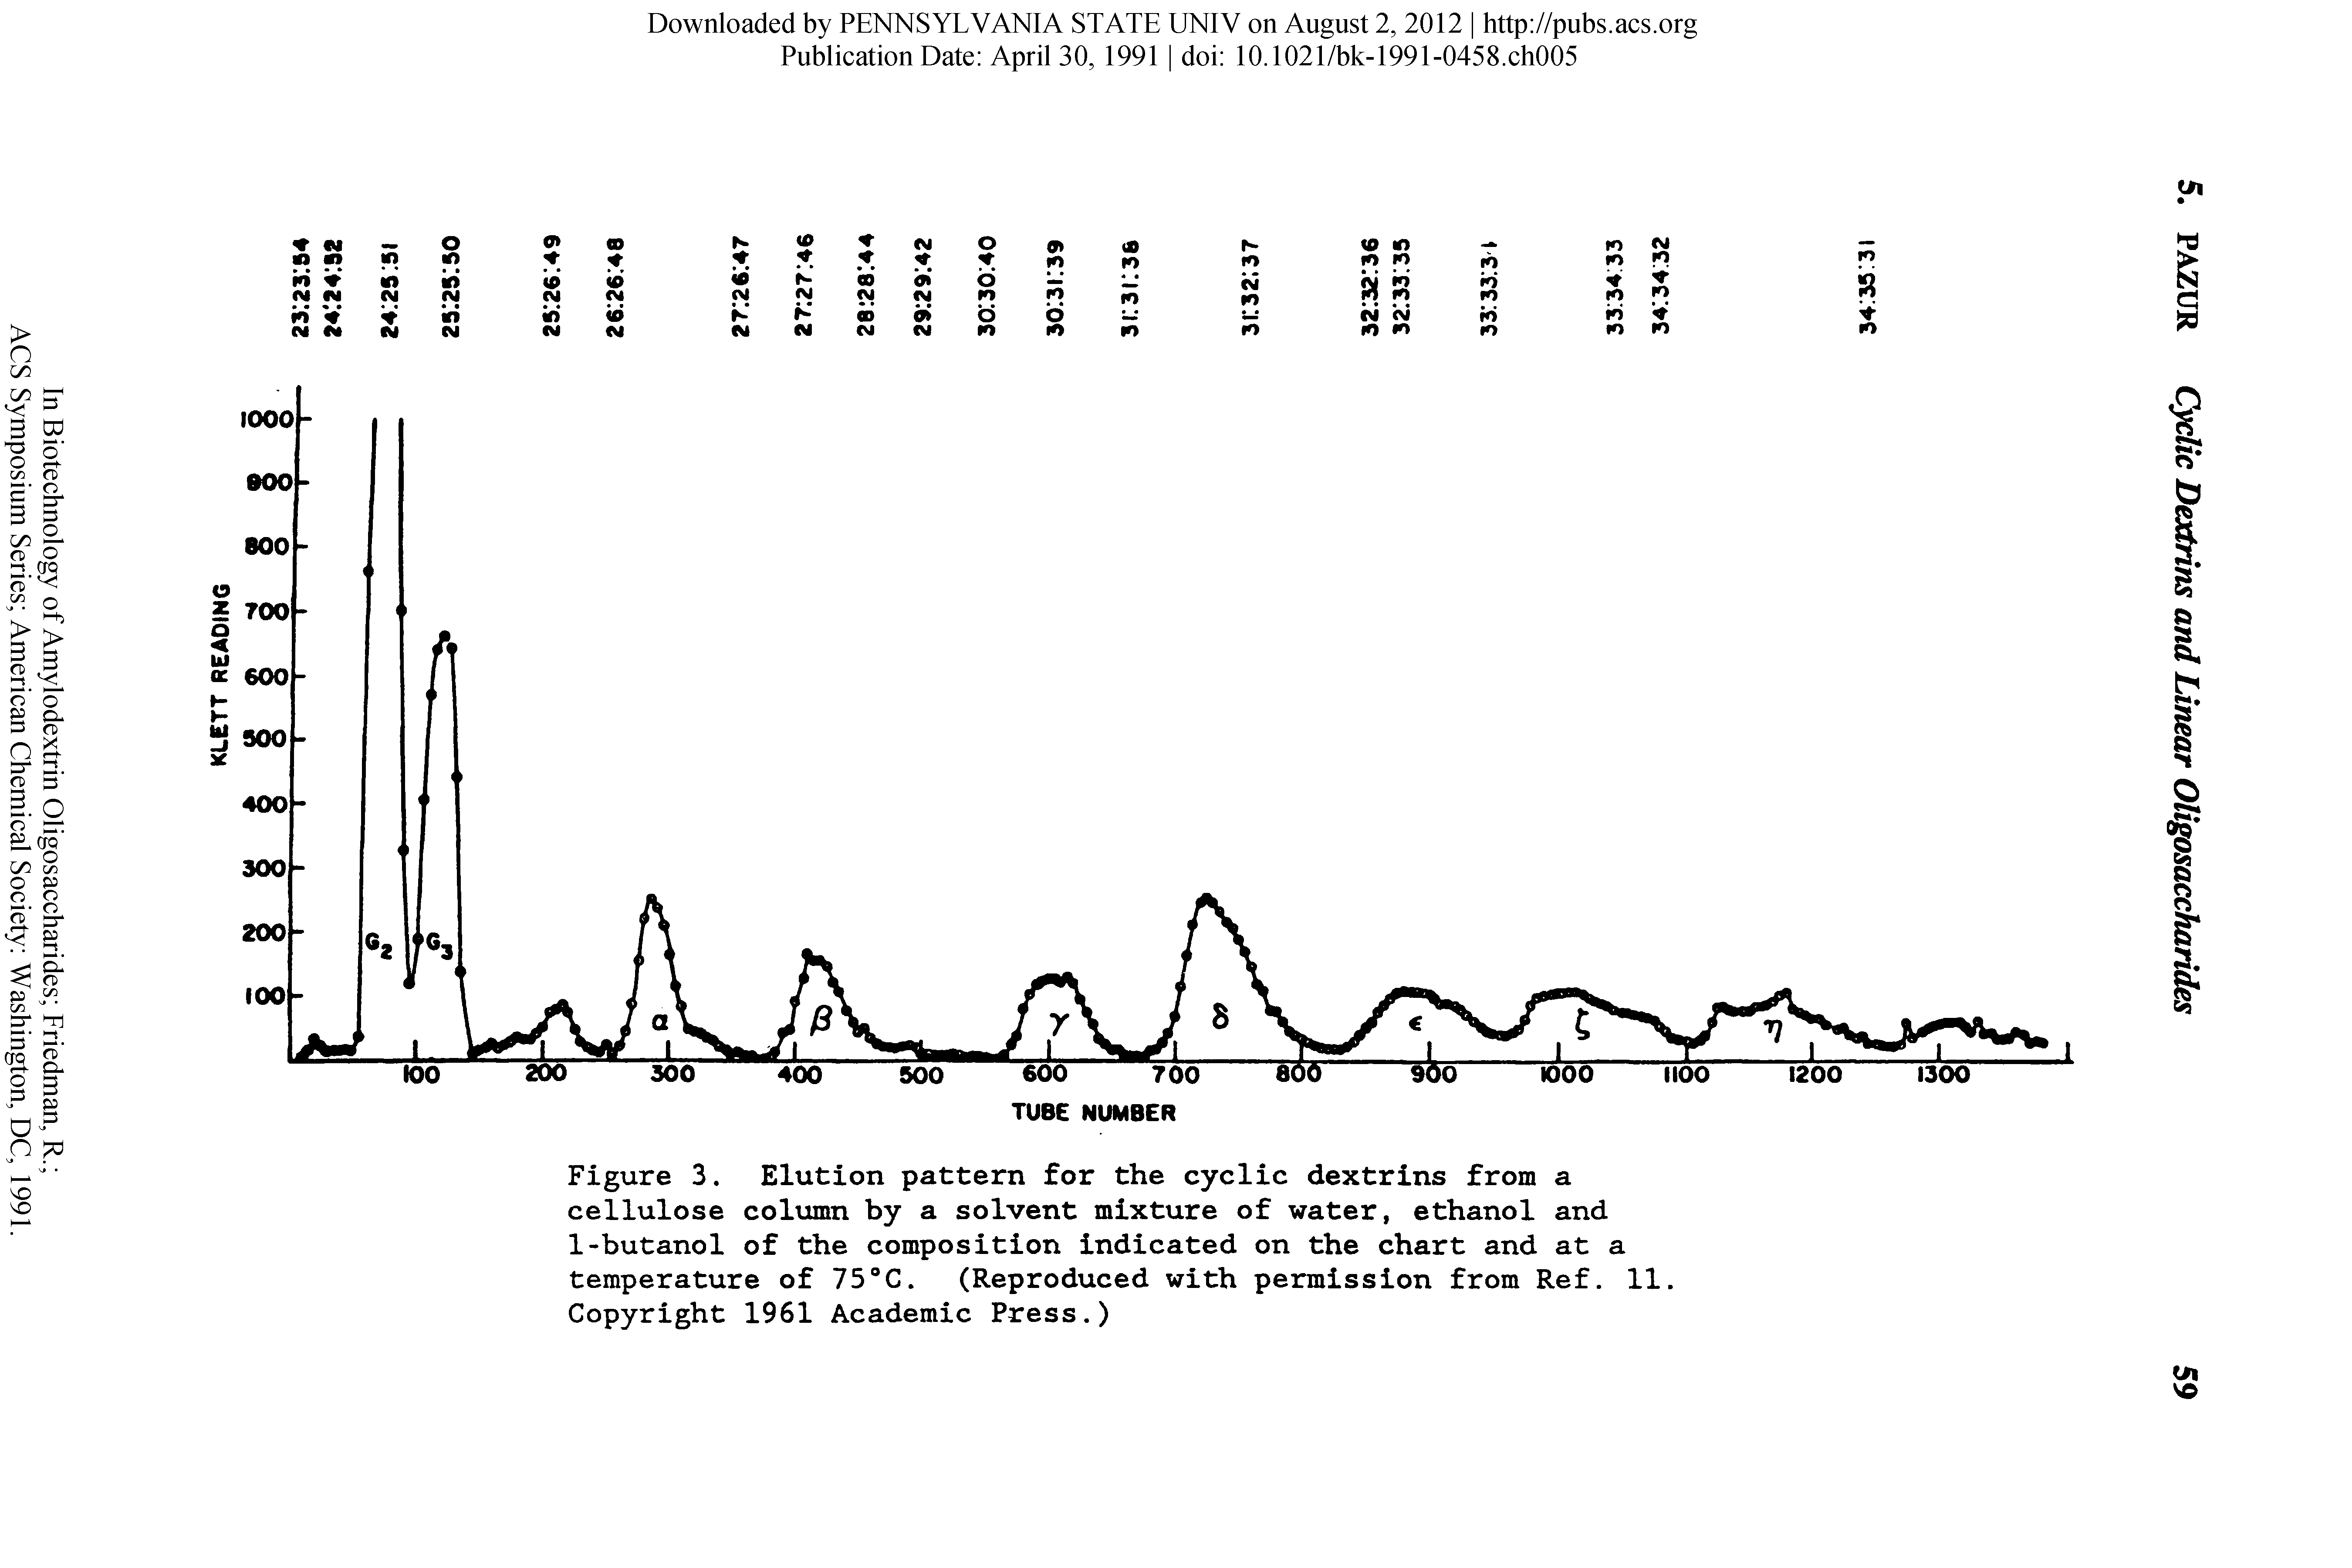 Figure 3. Elution pattern for the cyclic dextrins from a cellulose column by a solvent mixture of water, ethanol and 1-butanol of the composition indicated on the chart and at a temperature of 75°C. (Reproduced with permission from Ref. 11. Copyright 1961 Academic Press.)...